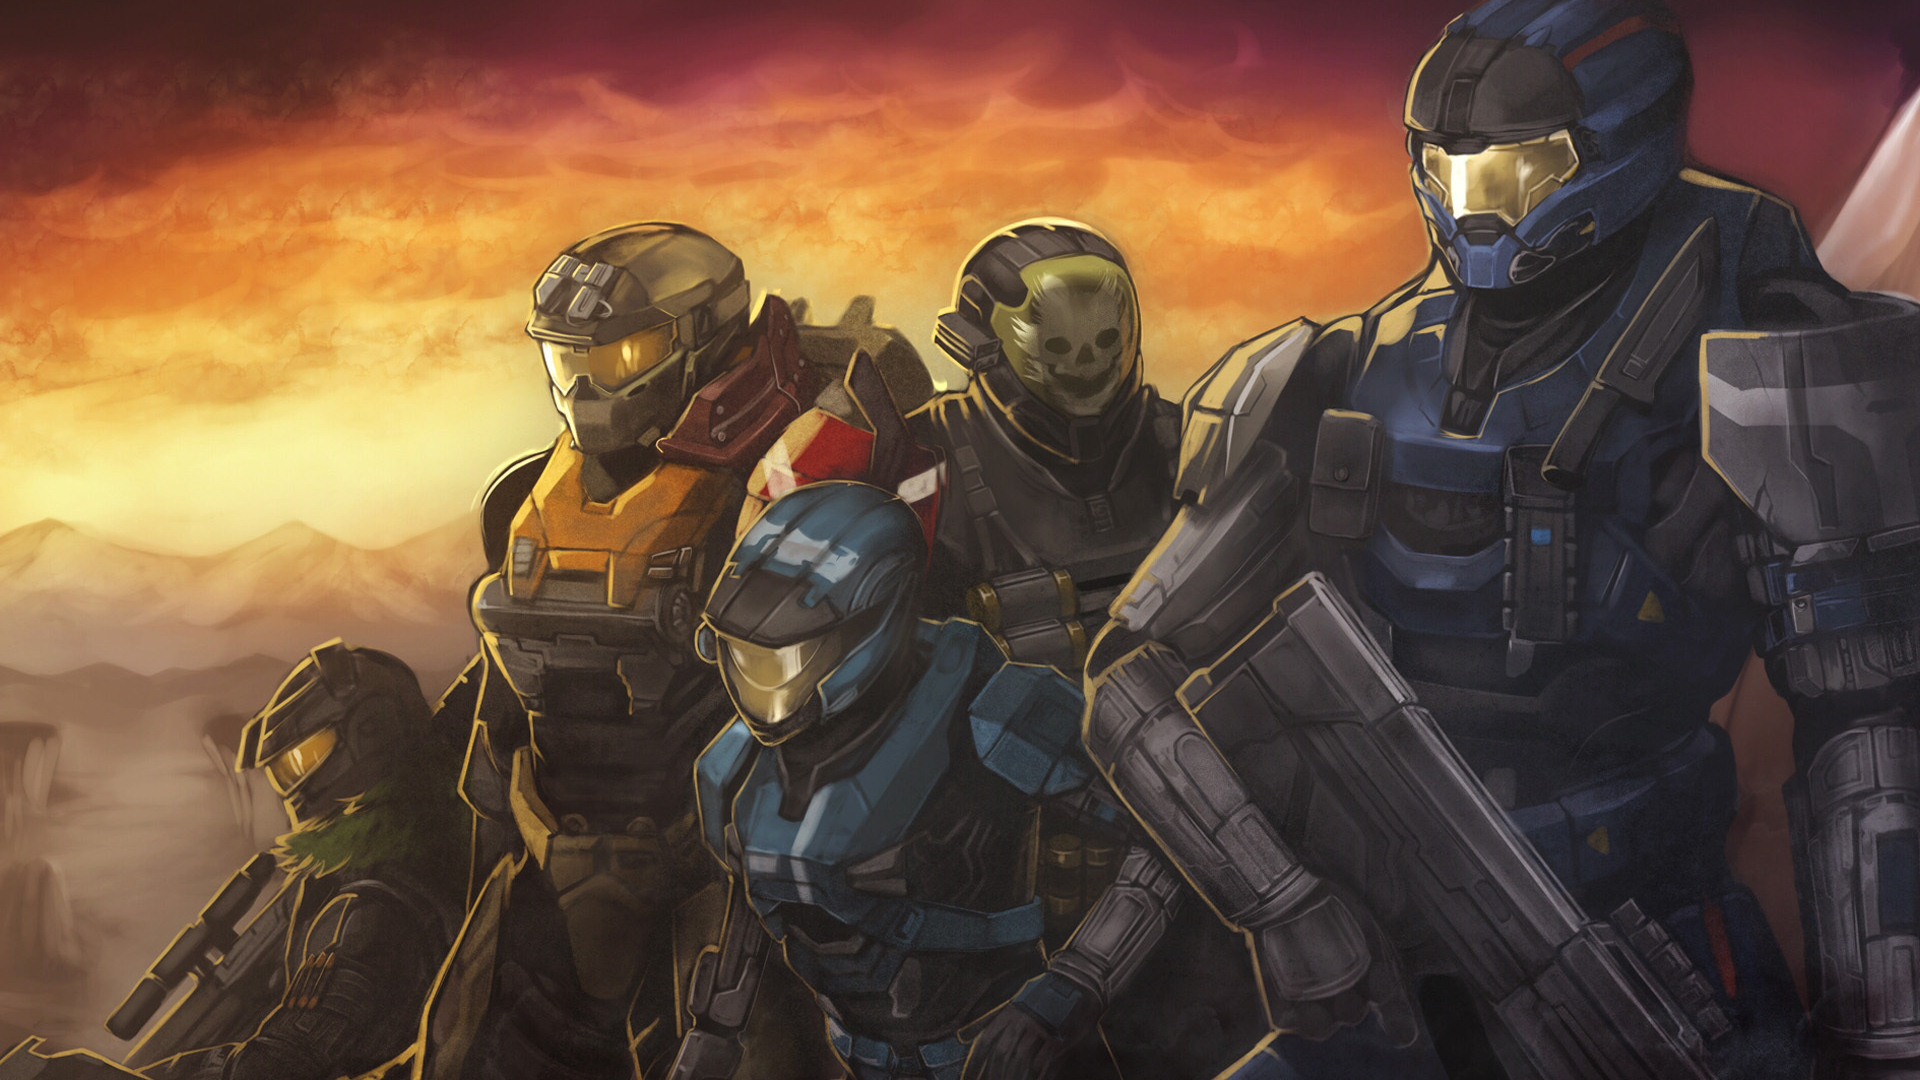 Halo game HD wallpapers #20 - 1920x1080